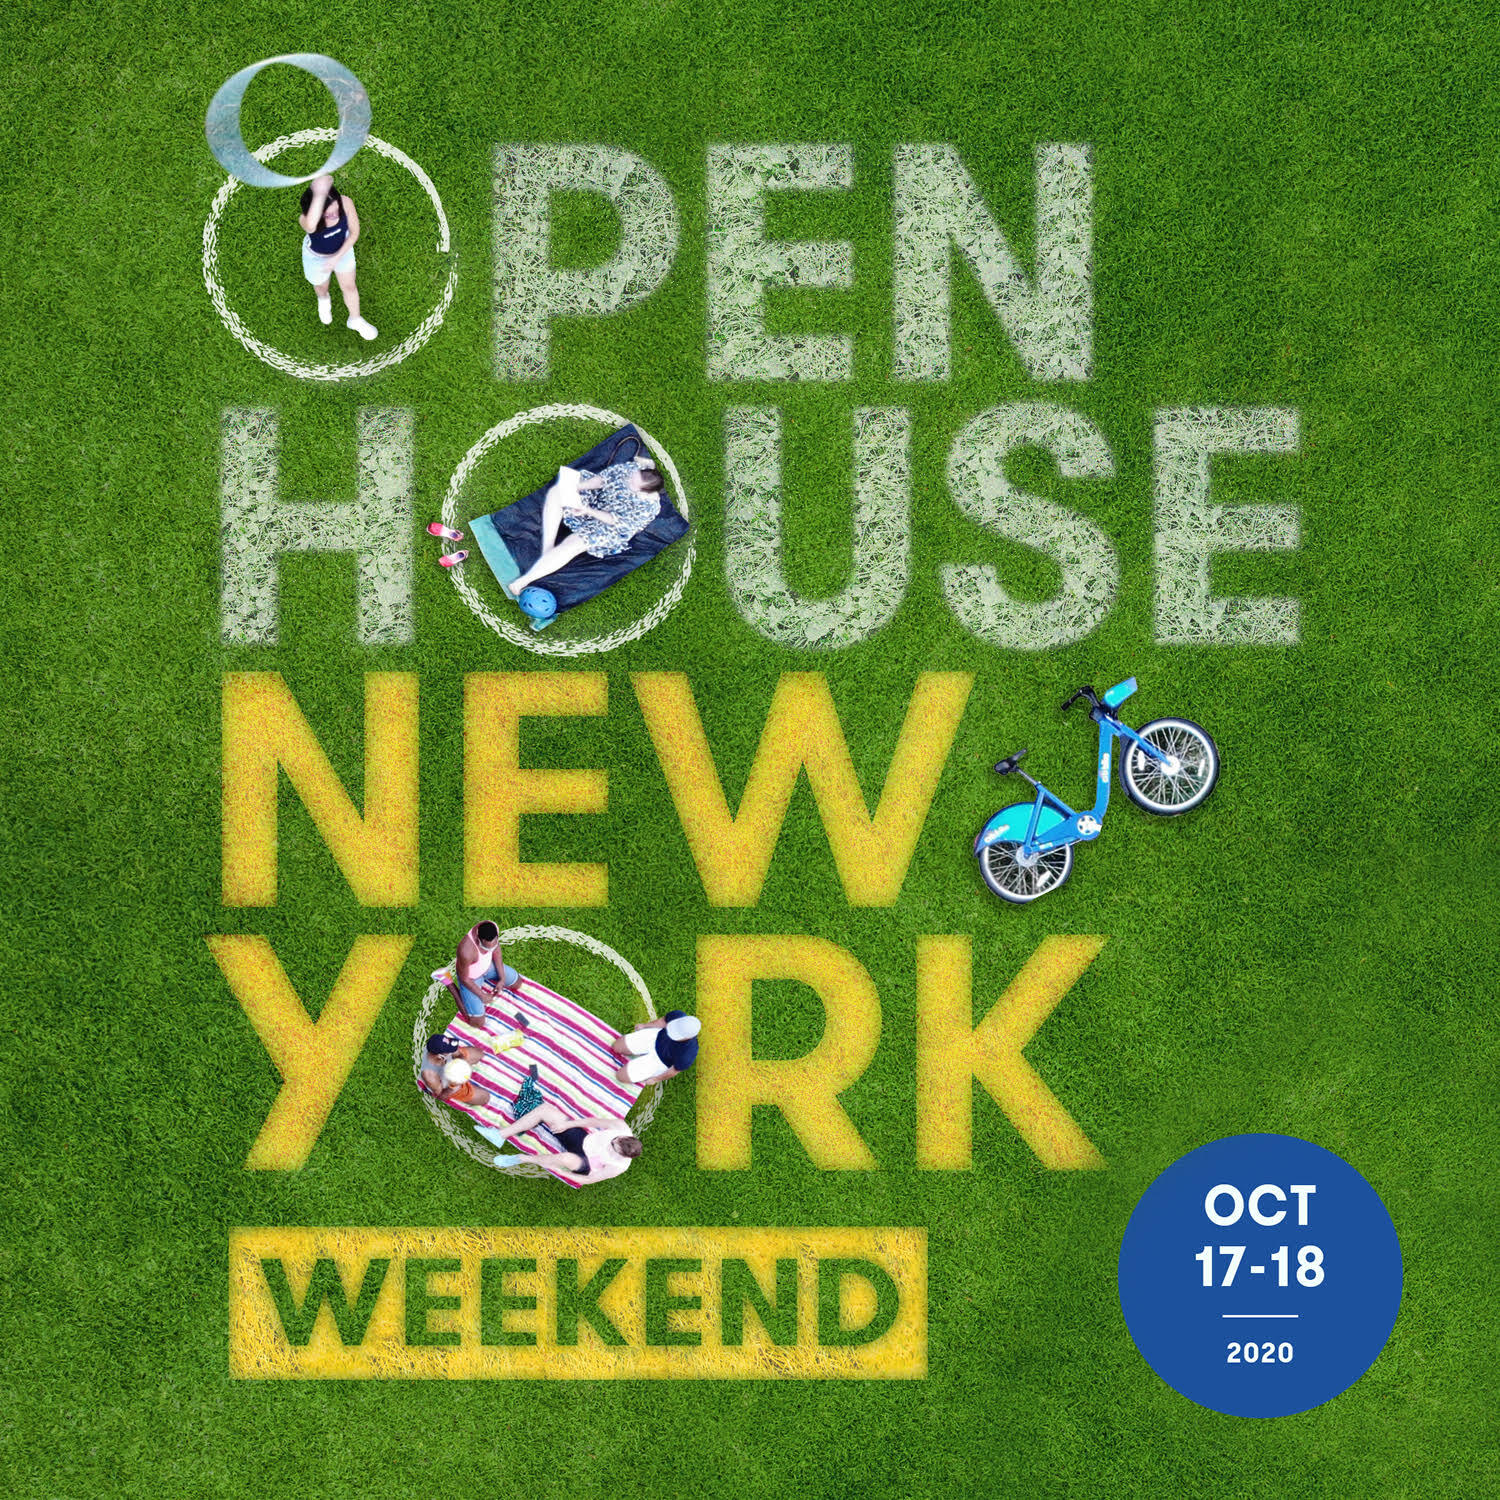 photo of grass with open house new york written over it